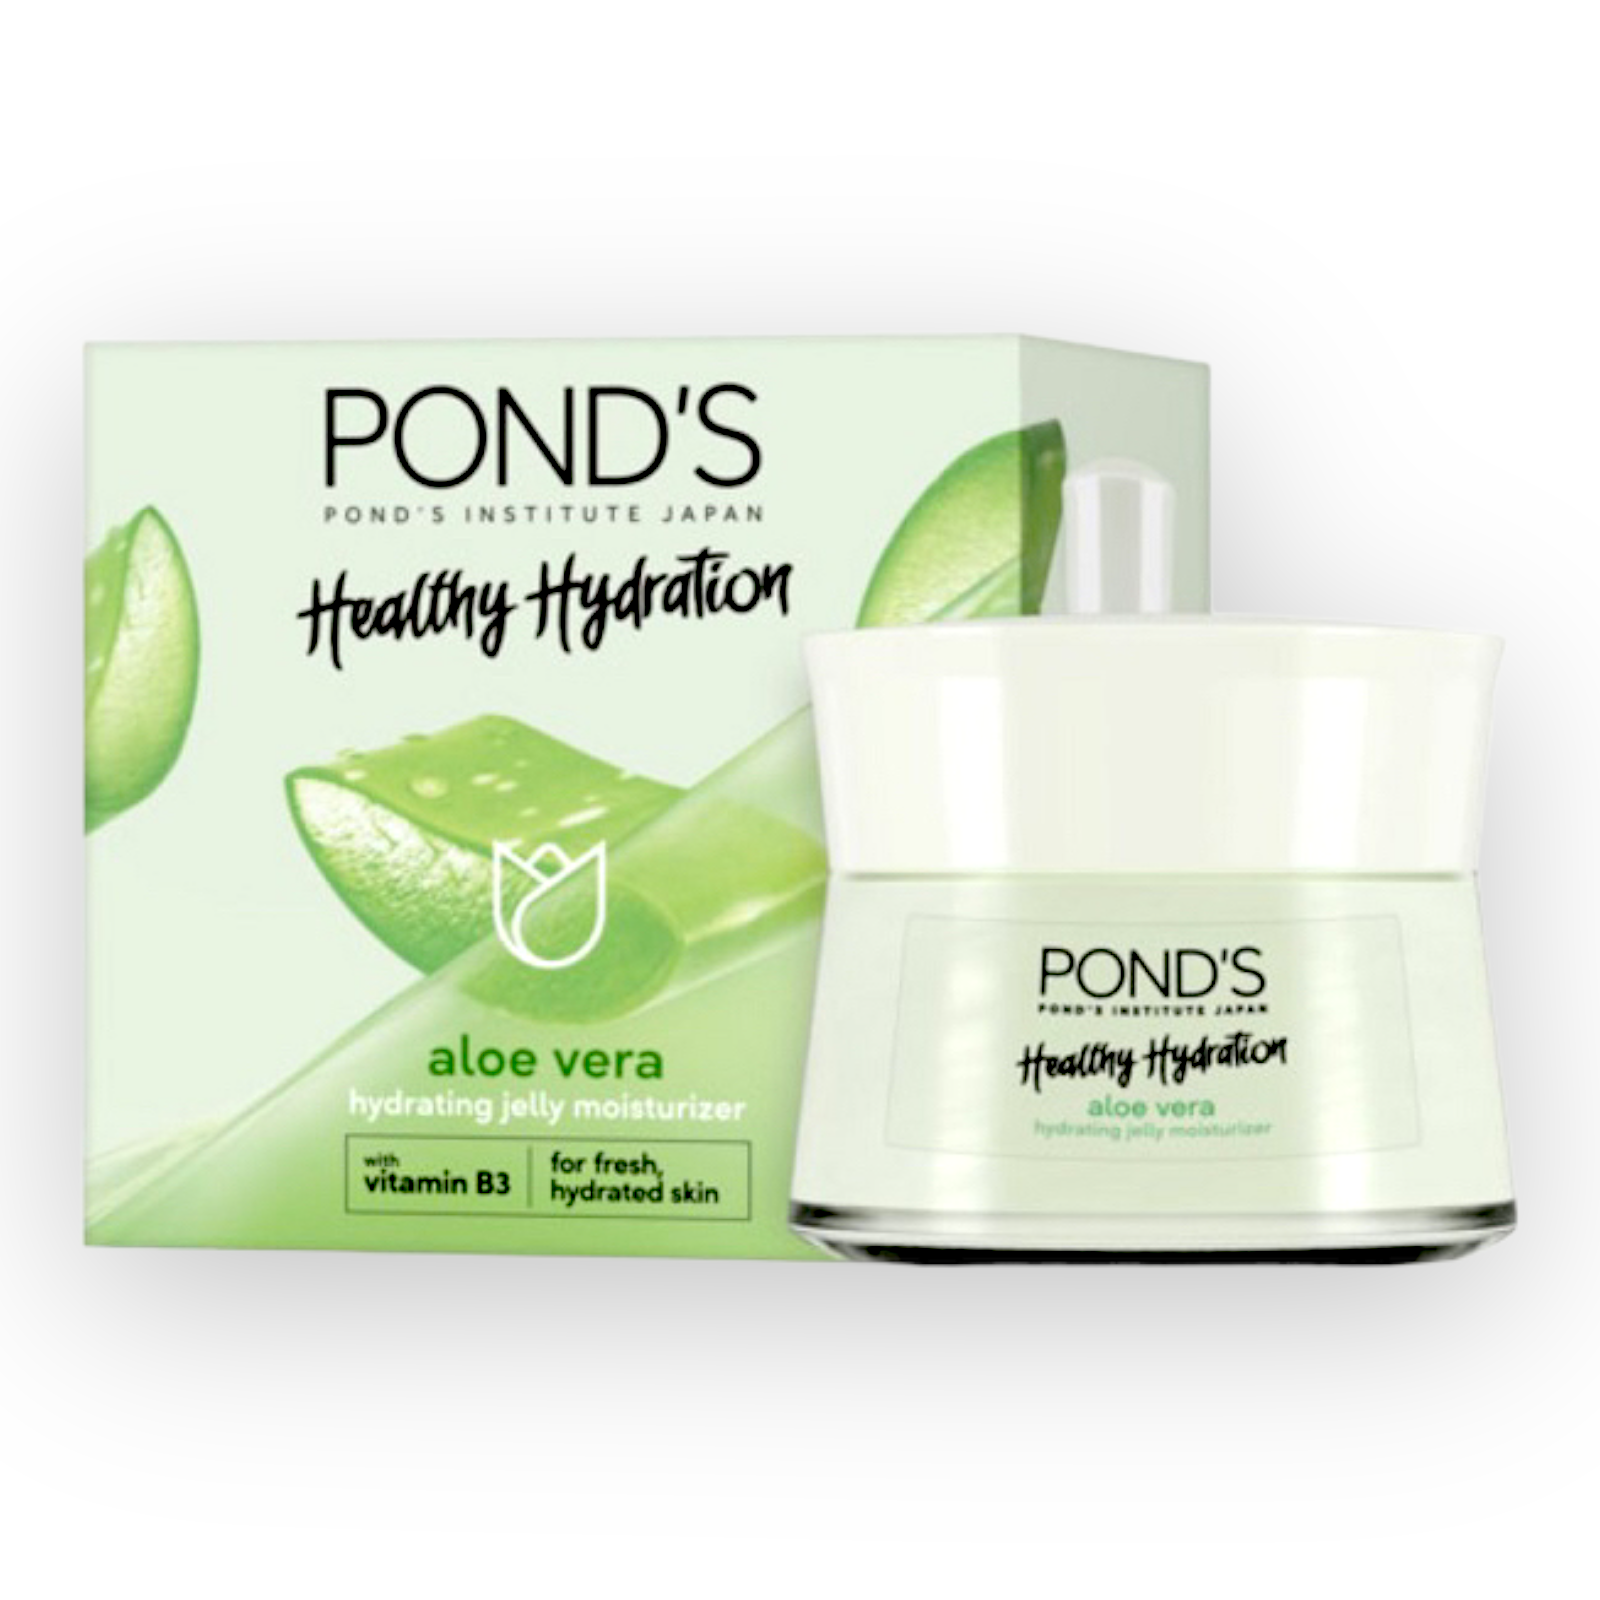 Ponds Healthy Hydration - Hydrating Jelly Moisturizer For Fresh and Hydrated Skin - Aloe Vera 50g